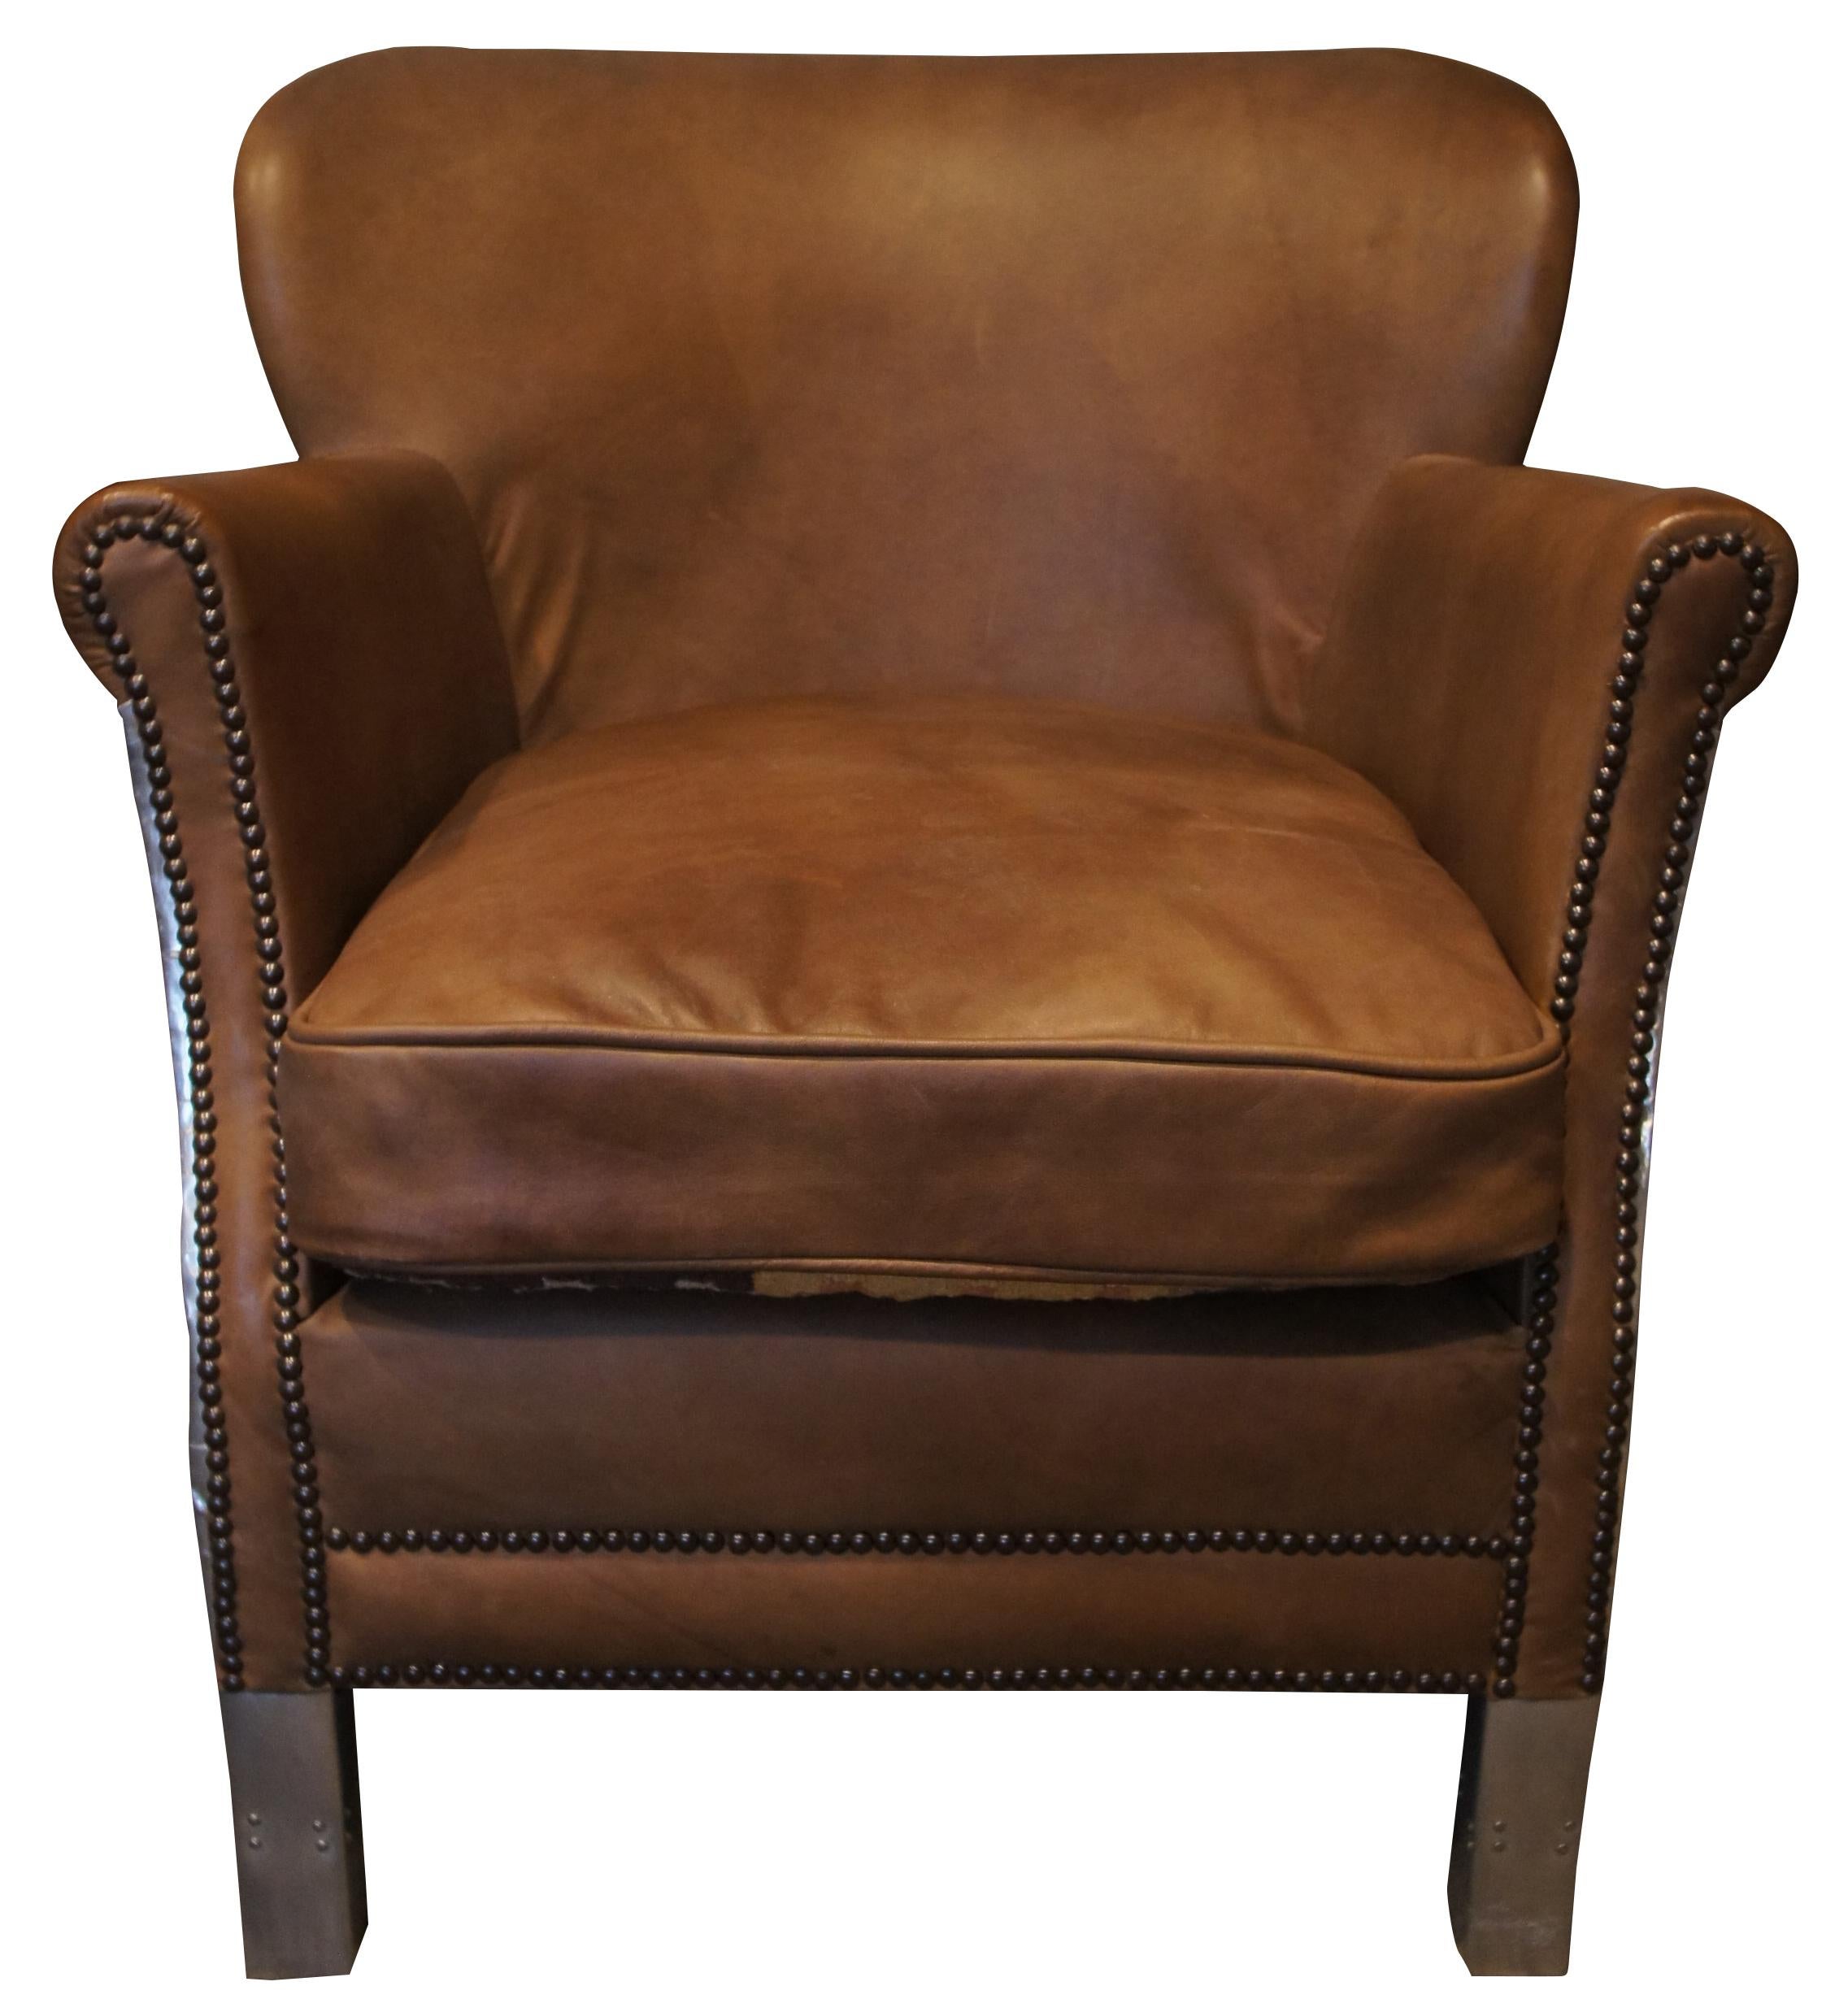 Restoration Hardware Leather Wingback Chair, Restoration Hardware Leather Chair Used